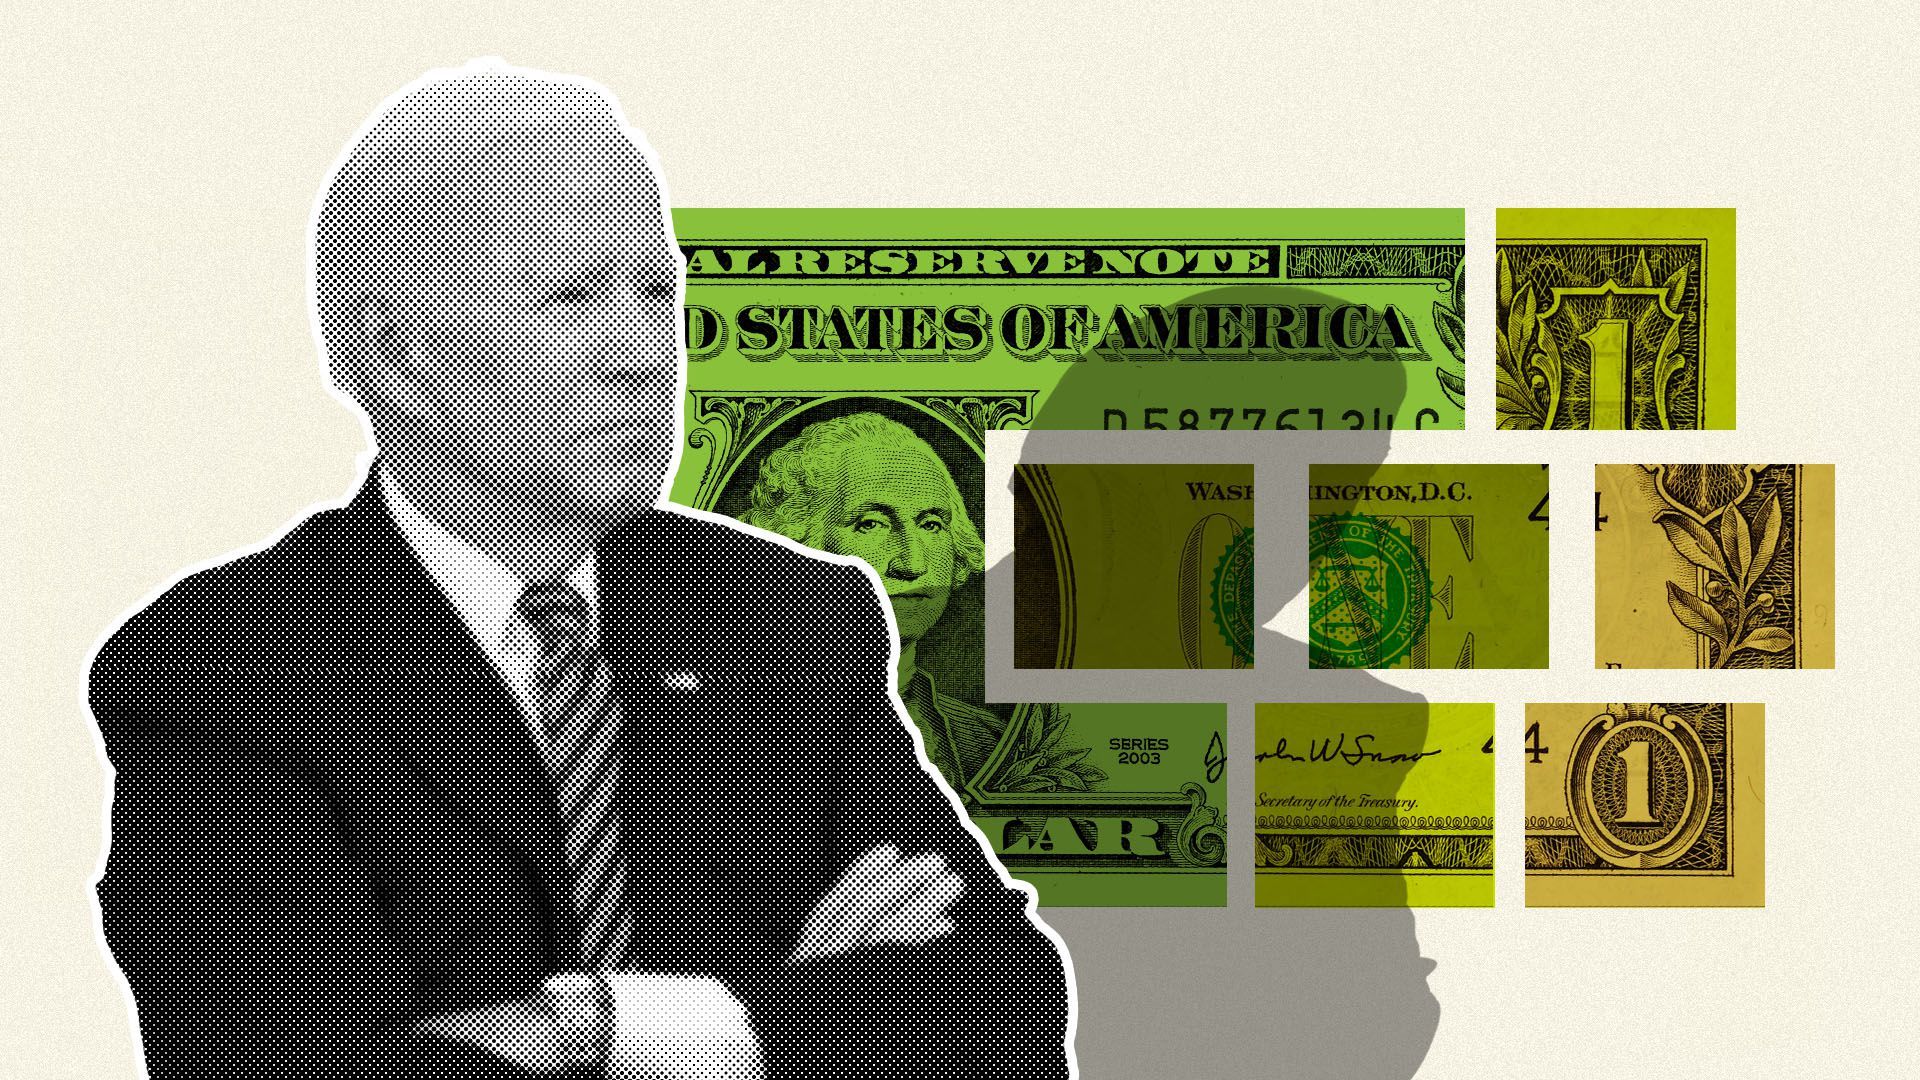 Photo illustration of President Bide with a broken up dollar in the background